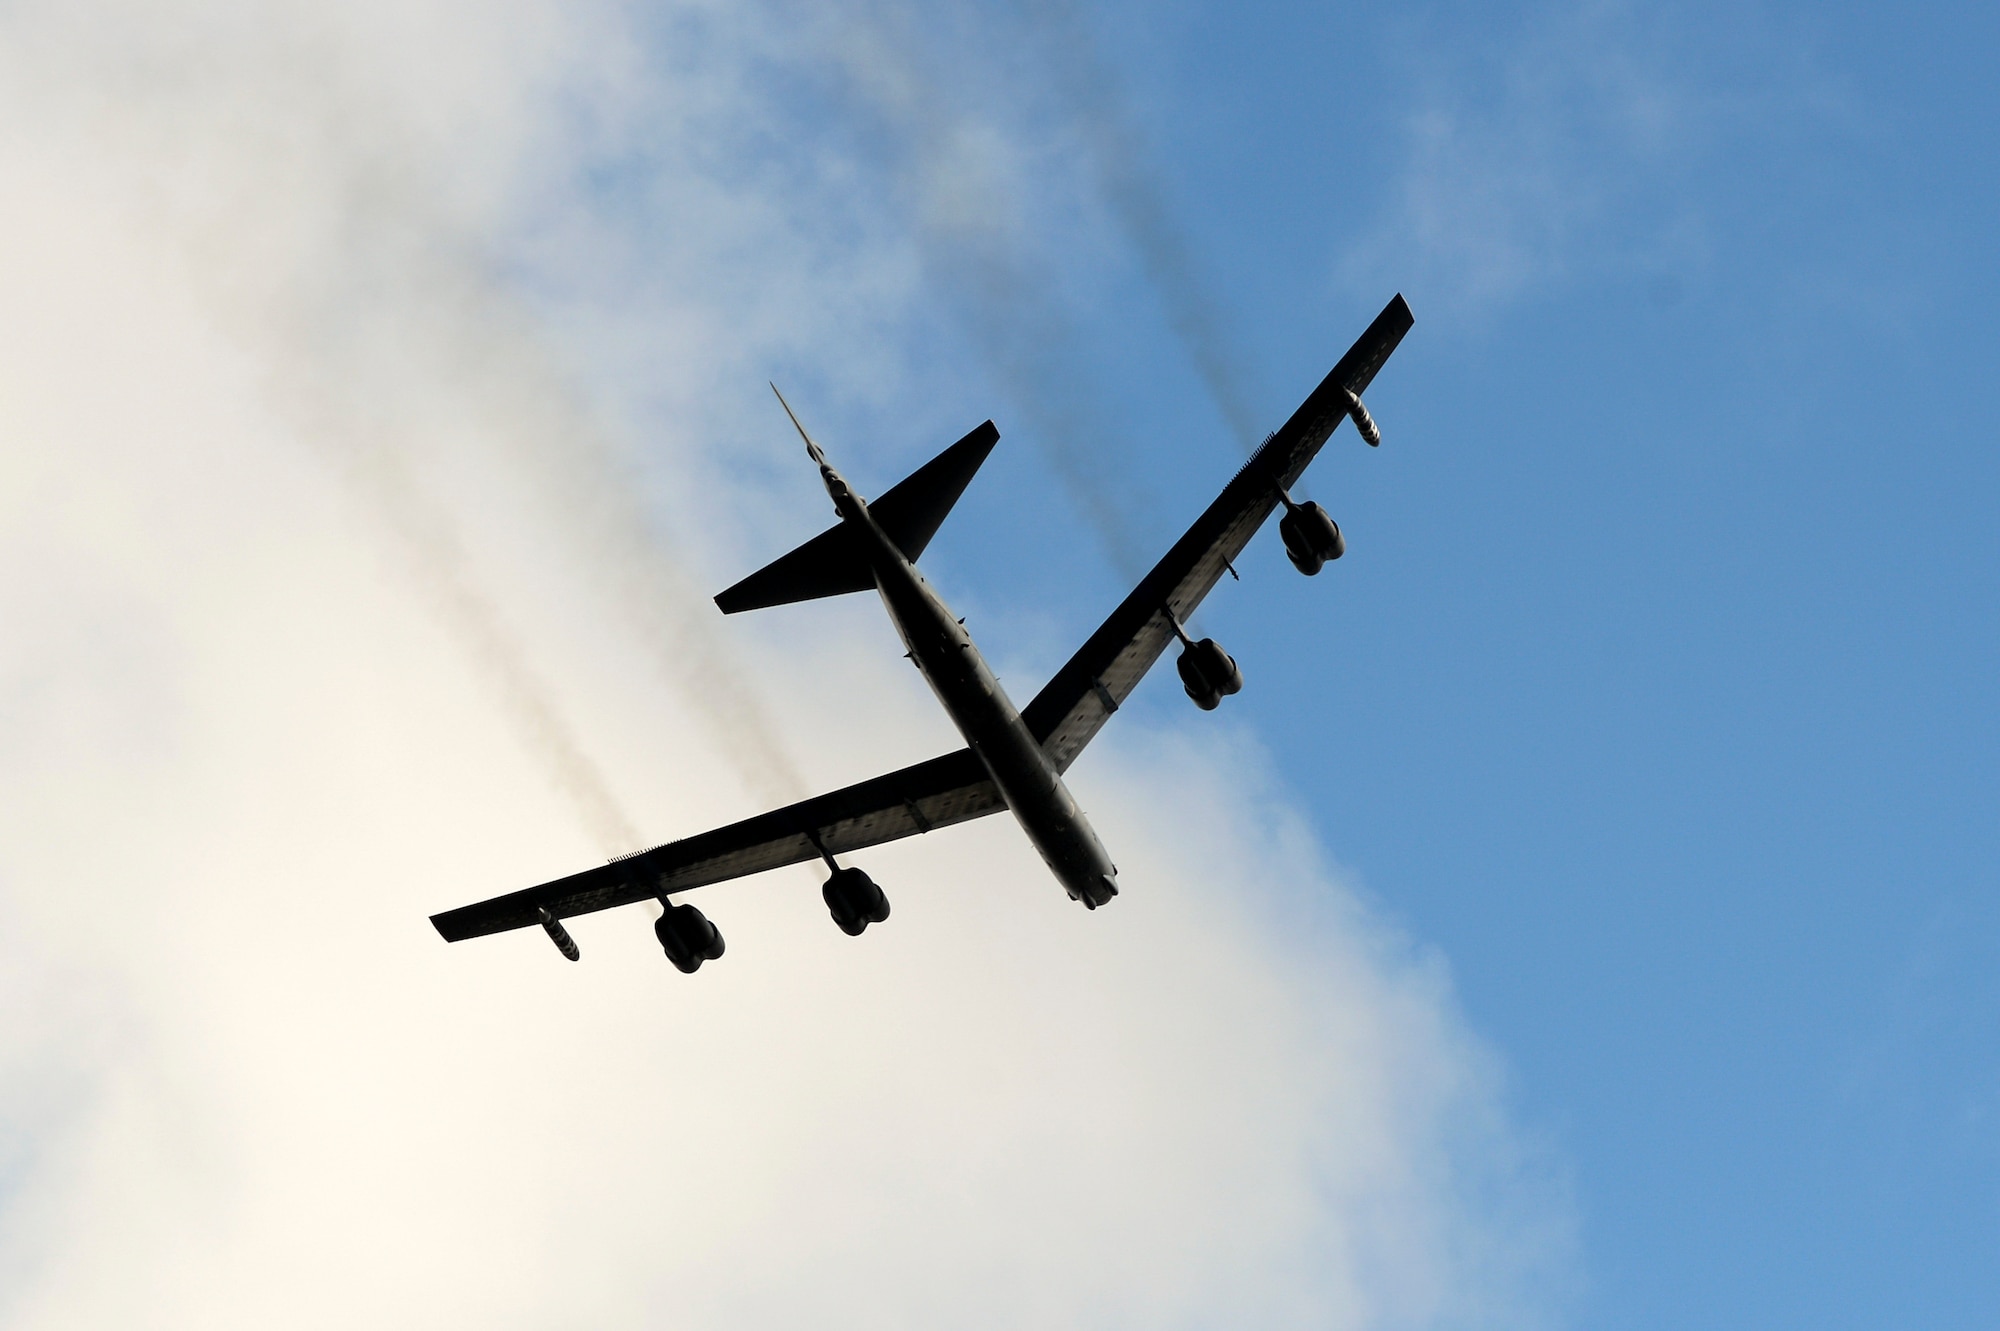 A U.S. Air Force B-52 Bomber makes a fly-by over a monument dedication ceremony for Lt. Gen. Frank Maxwell Andrews and his 13 crew members, May 3, 2018, in Keflavic, Iceland. The ceremony recognized the 75th anniversary of the crash of the B-24 Liberator, ‘Hot Stuff’ which resulted in the death of Andrews and his crew. (U.S. Air Force photo by Staff Sgt. Kenny Holston)